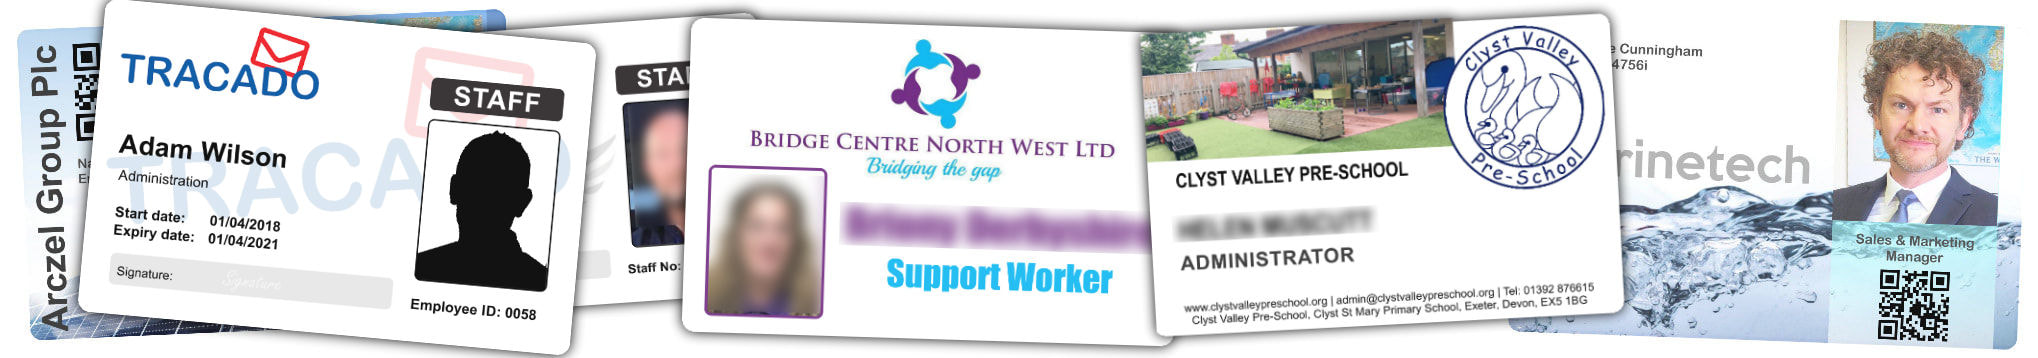 Mansfield examples of staff photo ID cards | samples of employee Identity card printing | Workers ID cards printed in 